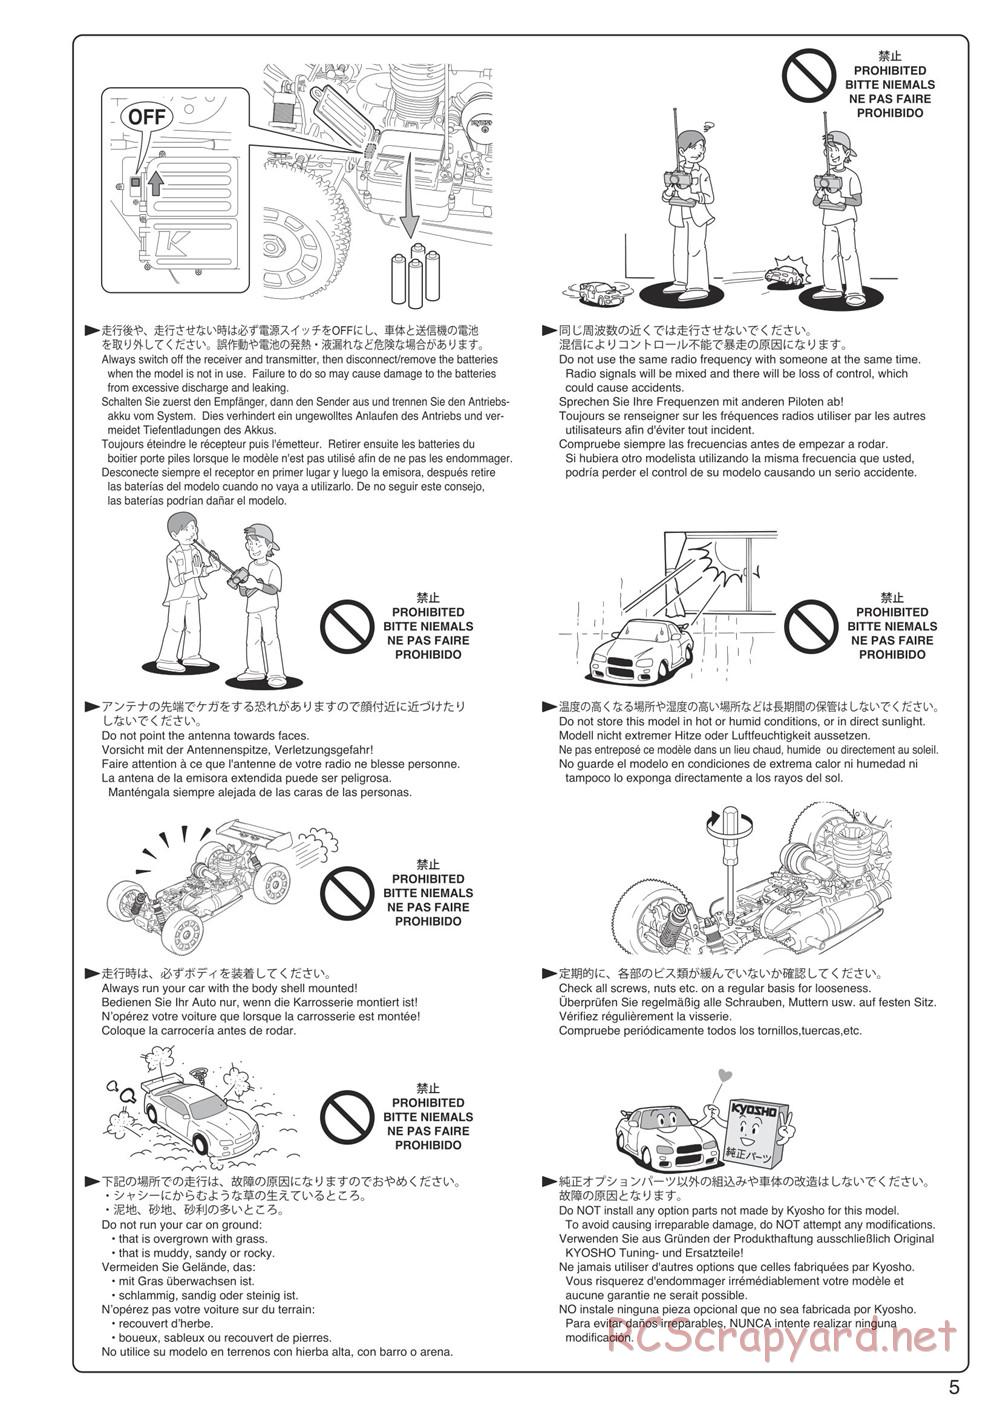 Kyosho - Inferno Neo - Manual - Page 5